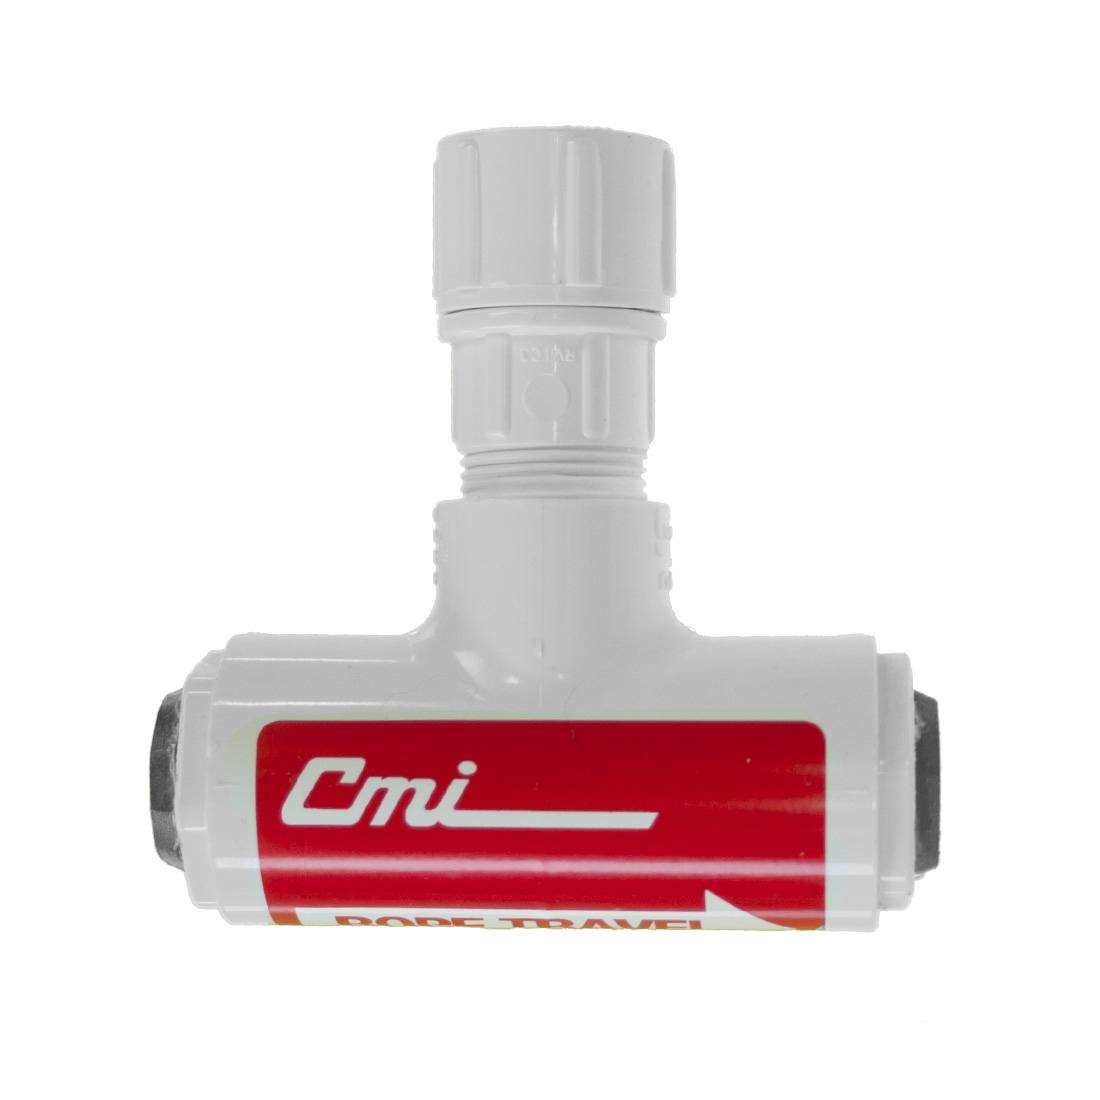 CMI Rope Washer - 1/2 Inch - Upright View